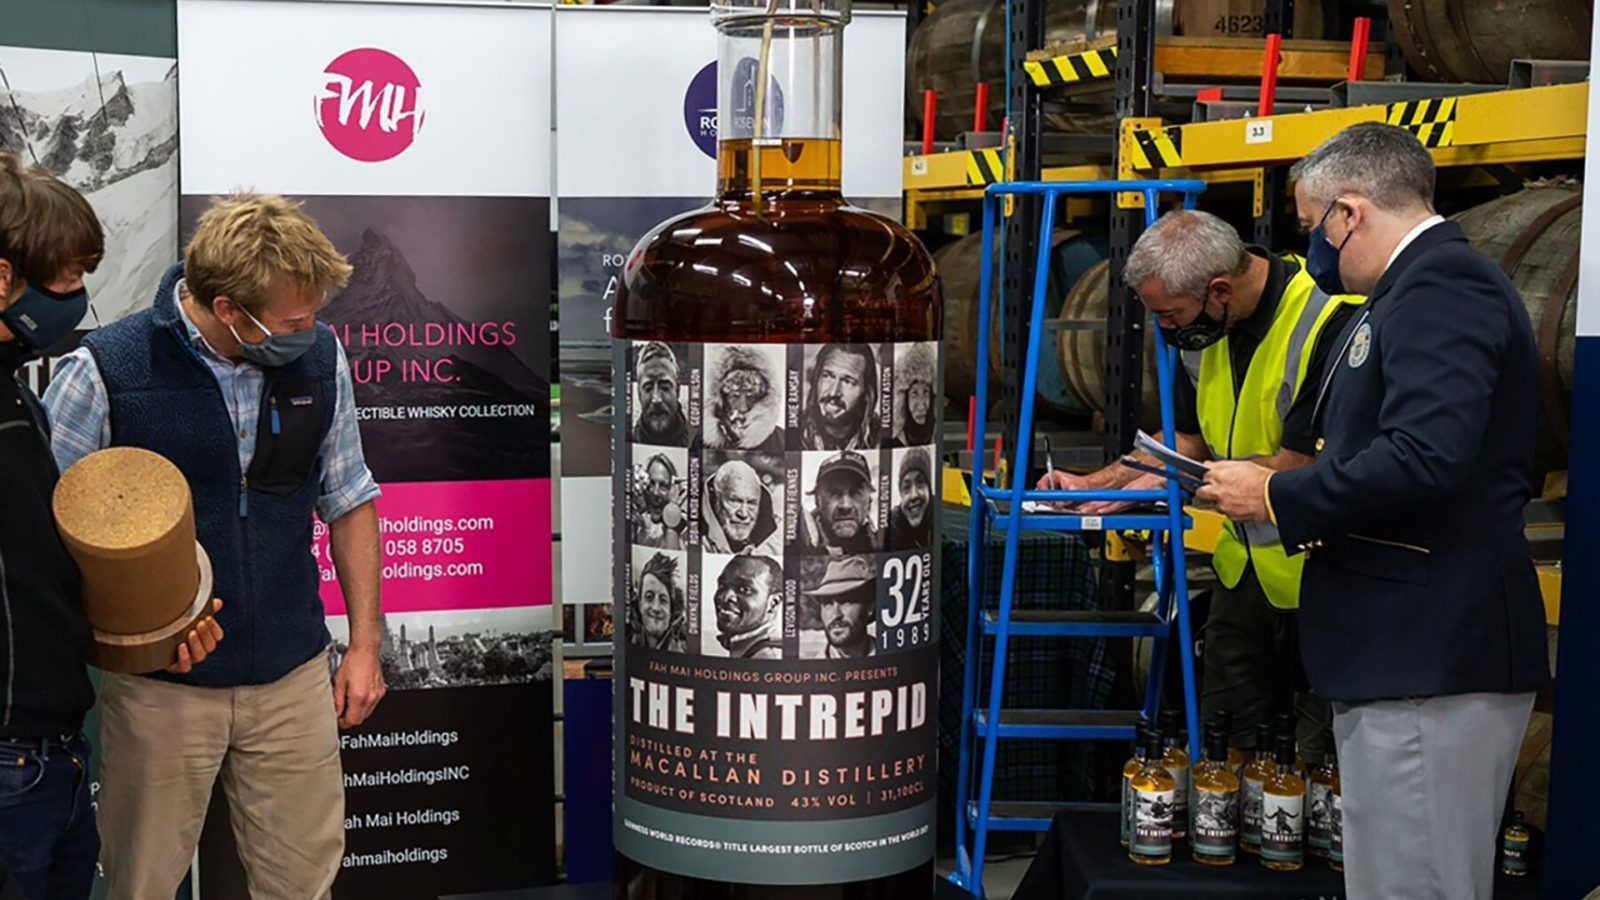 World’s largest bottle of scotch fails to break record for most expensive ever sold